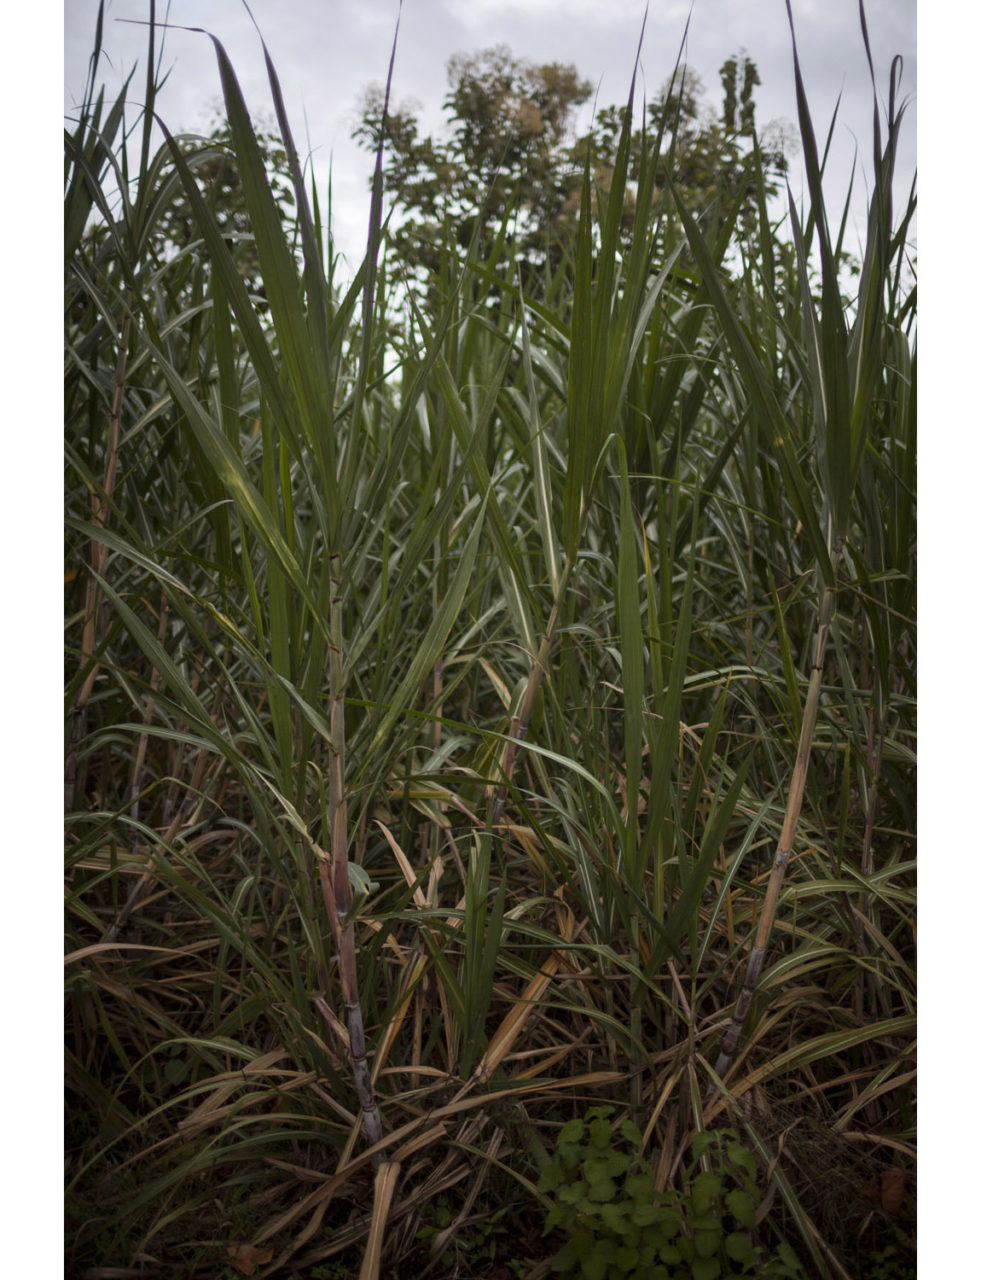 Sugarcane ready to be harvested in the fields of Karadakere.